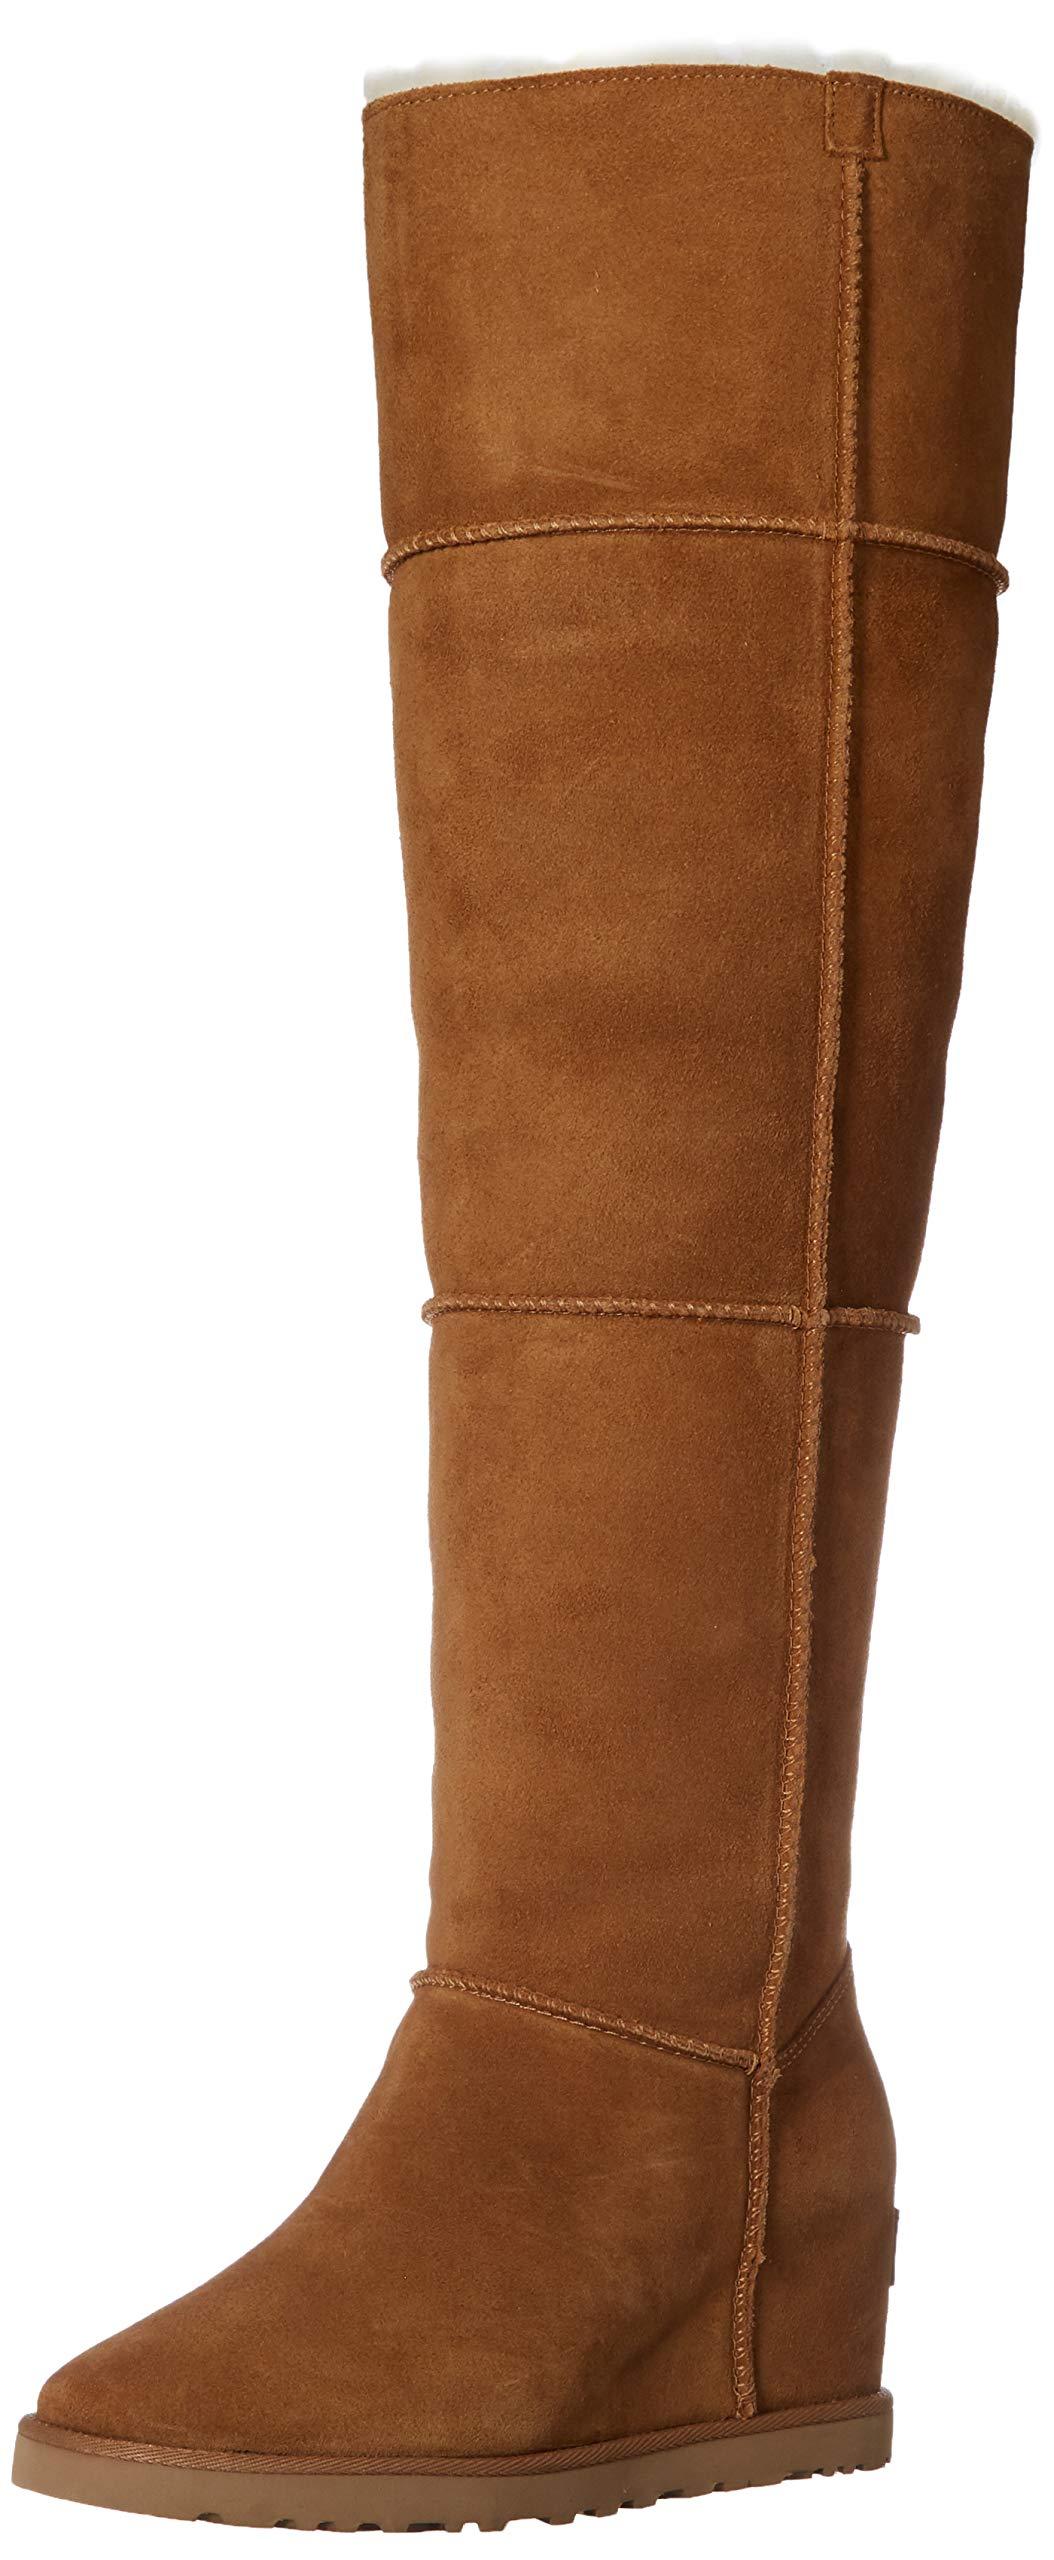 UGG Classic Femme Over The Knee Wedge in Chestnut (Brown) | Lyst